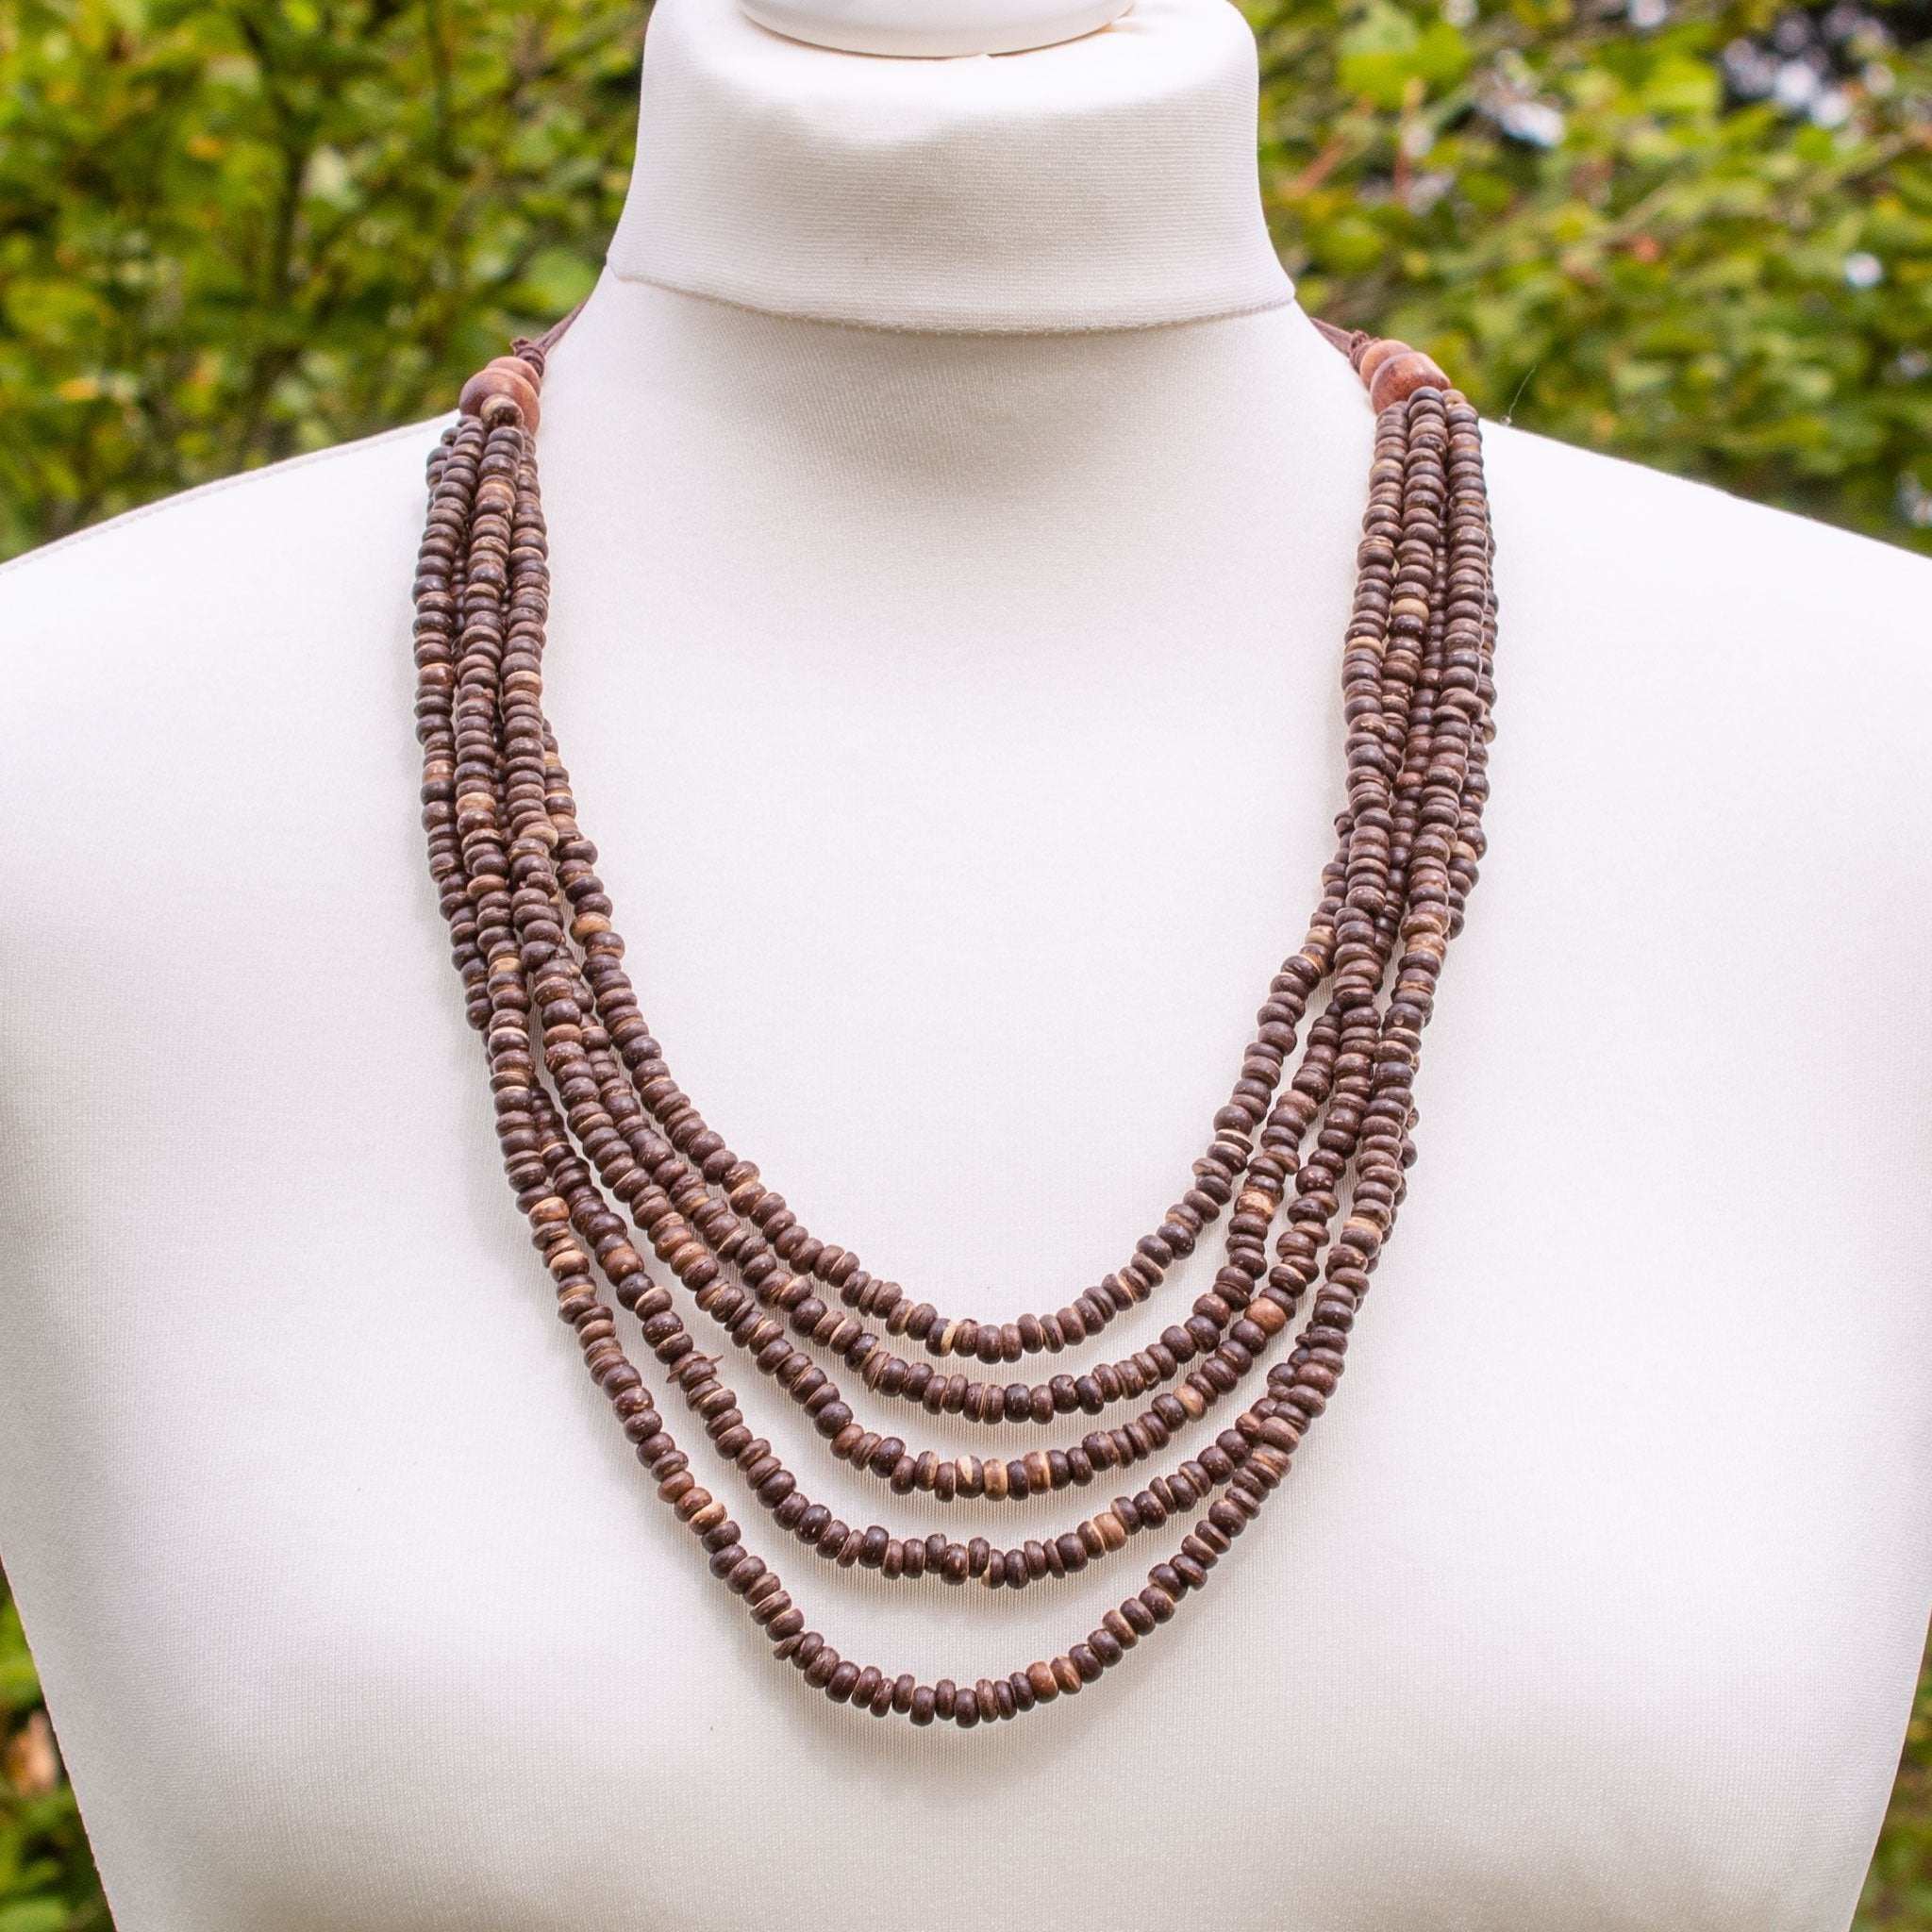 Men 's Wood Bead Long Necklace for a urban modern boho-hippie style